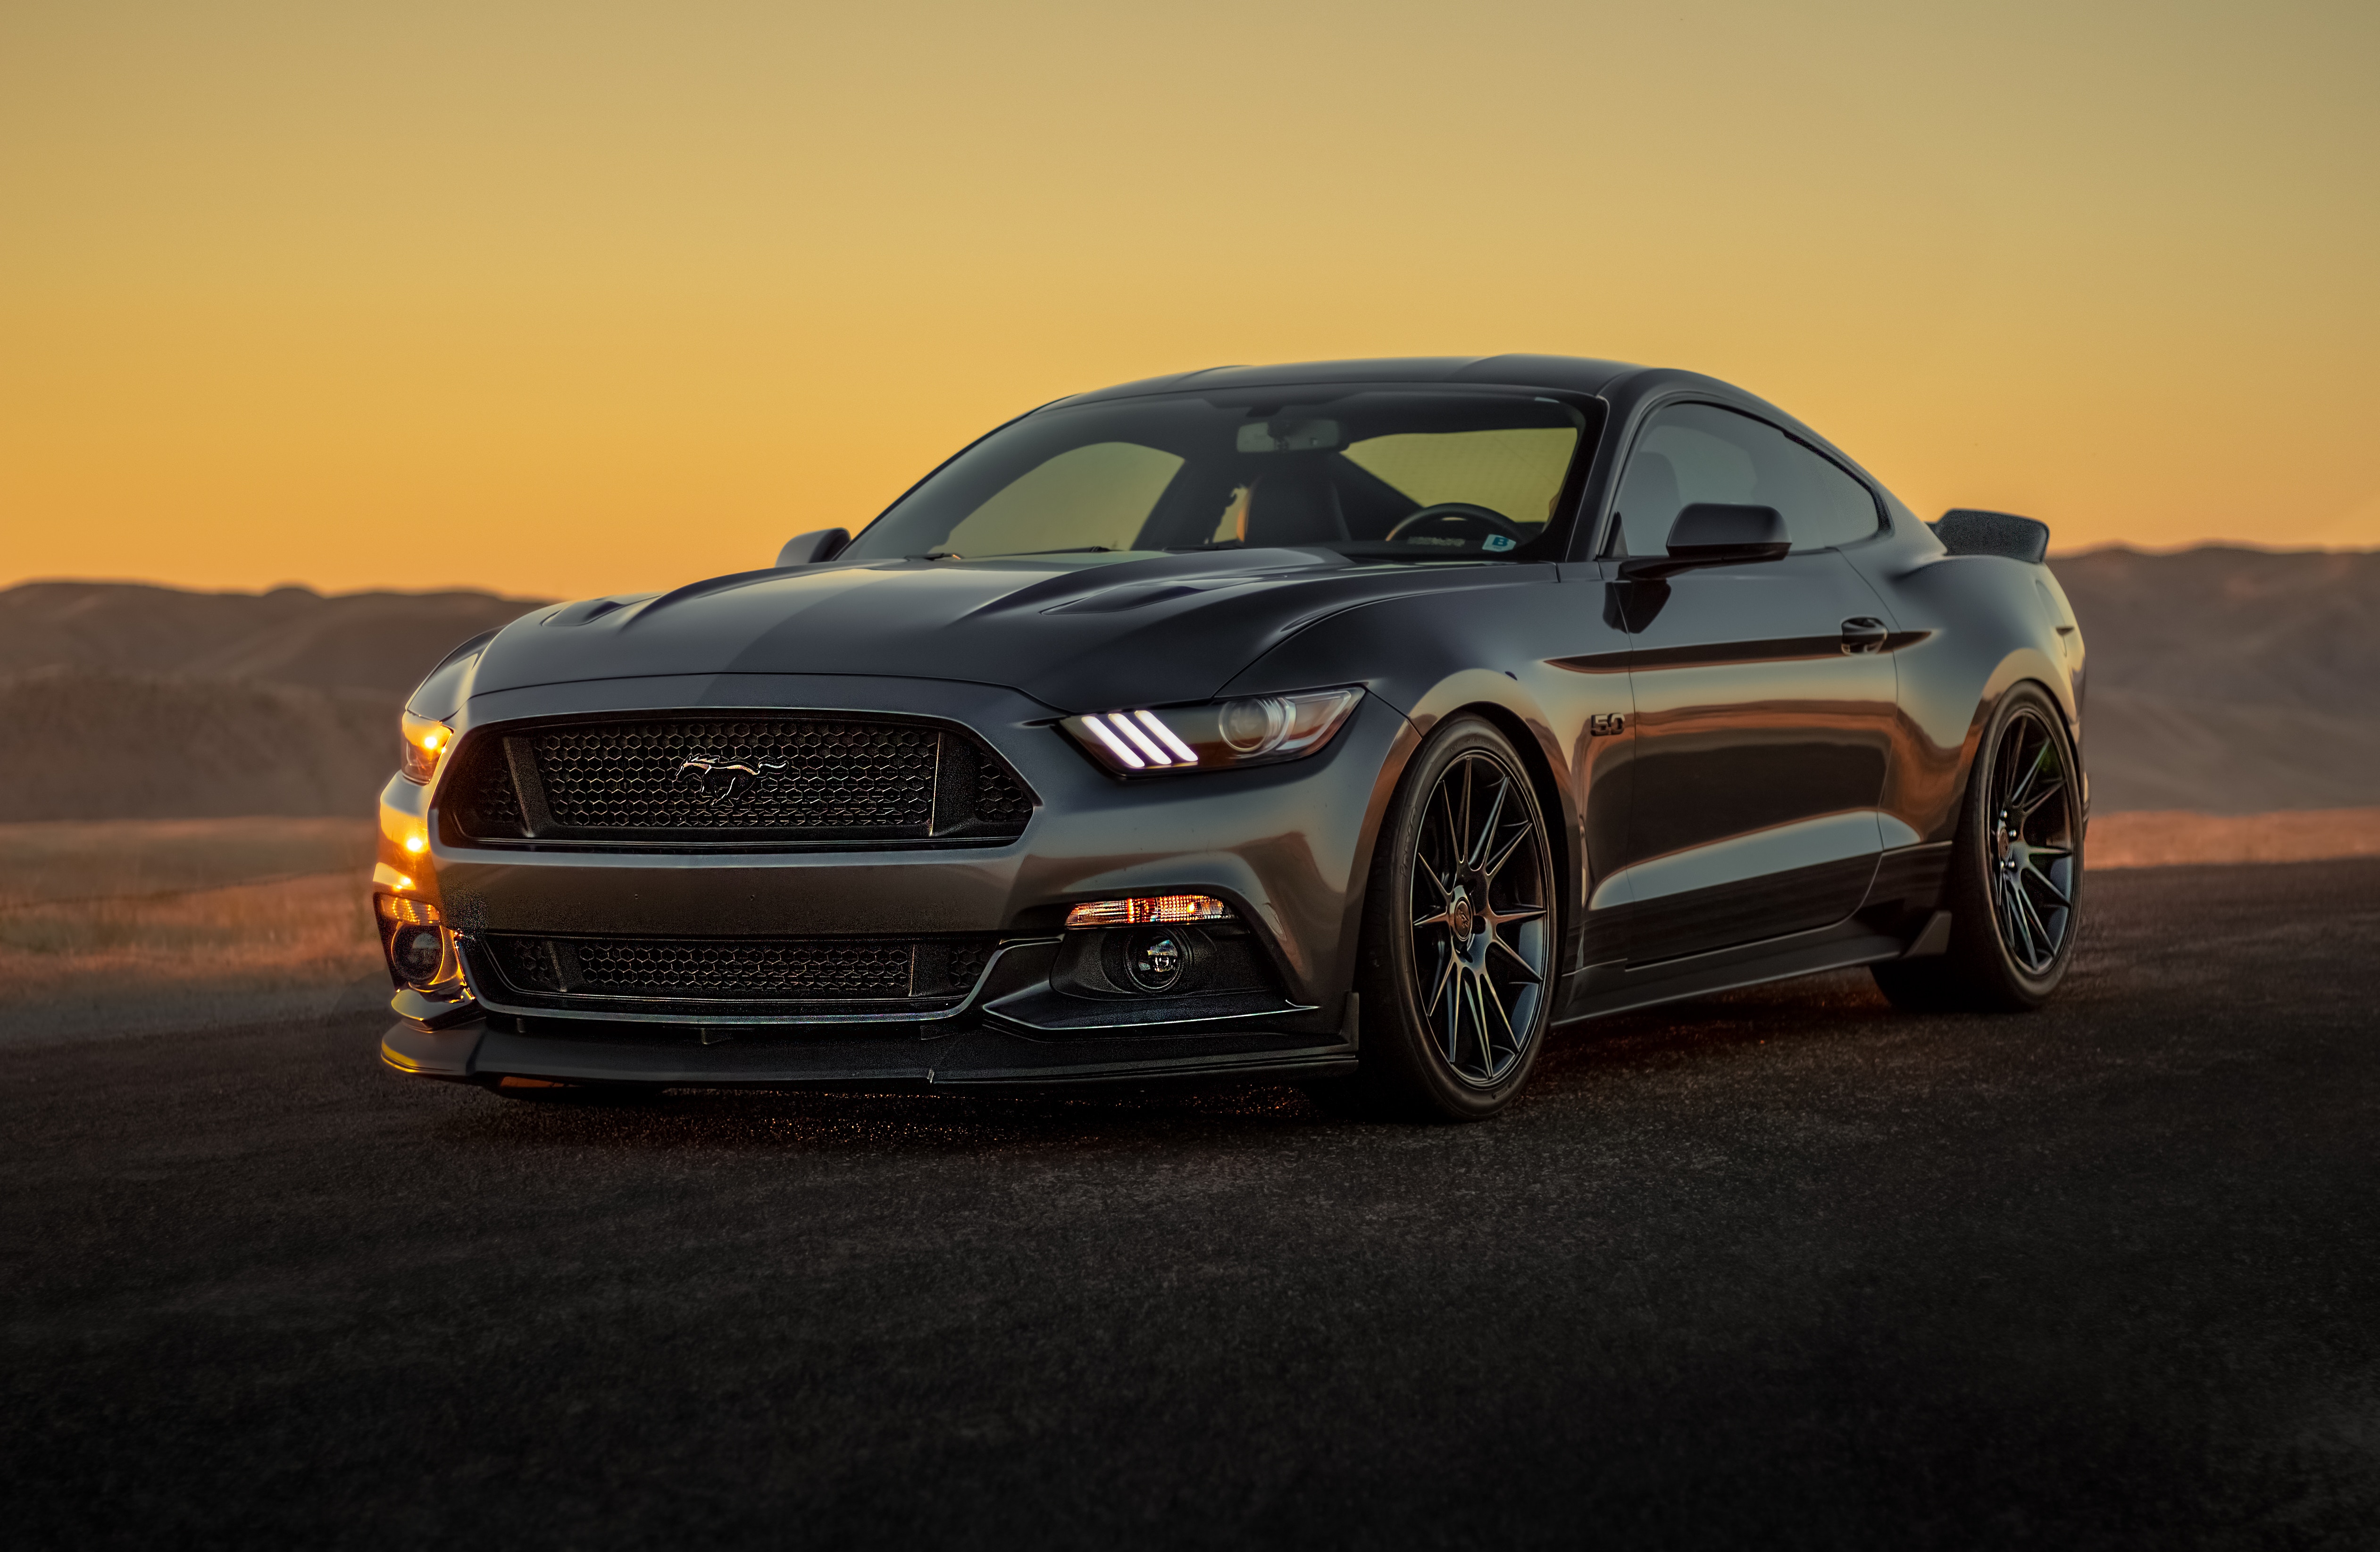 ford mustang, ford, cars, sunset, grey, bumper